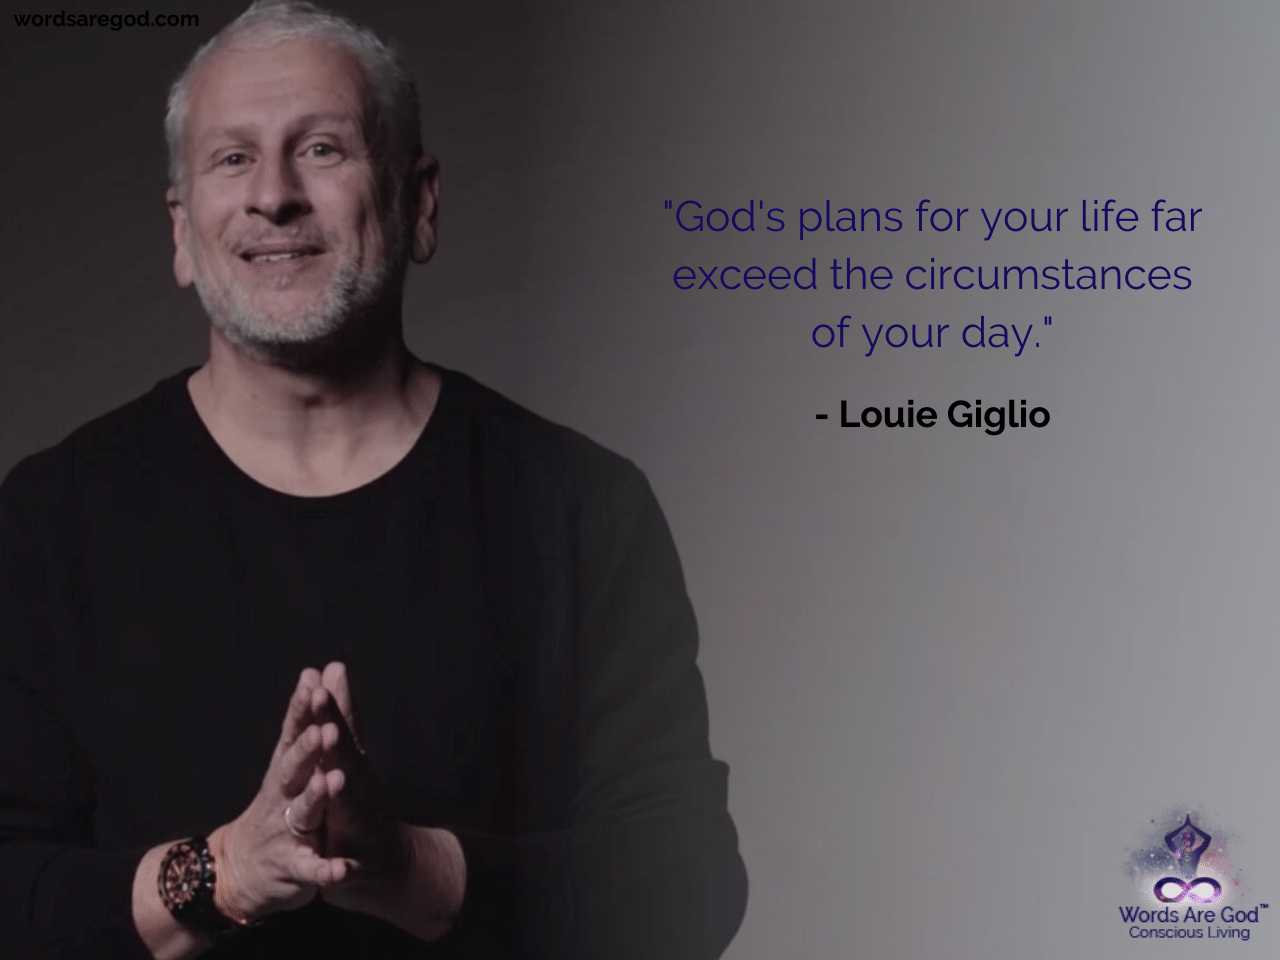 Louie Giglio Best Quote by Louie Giglio